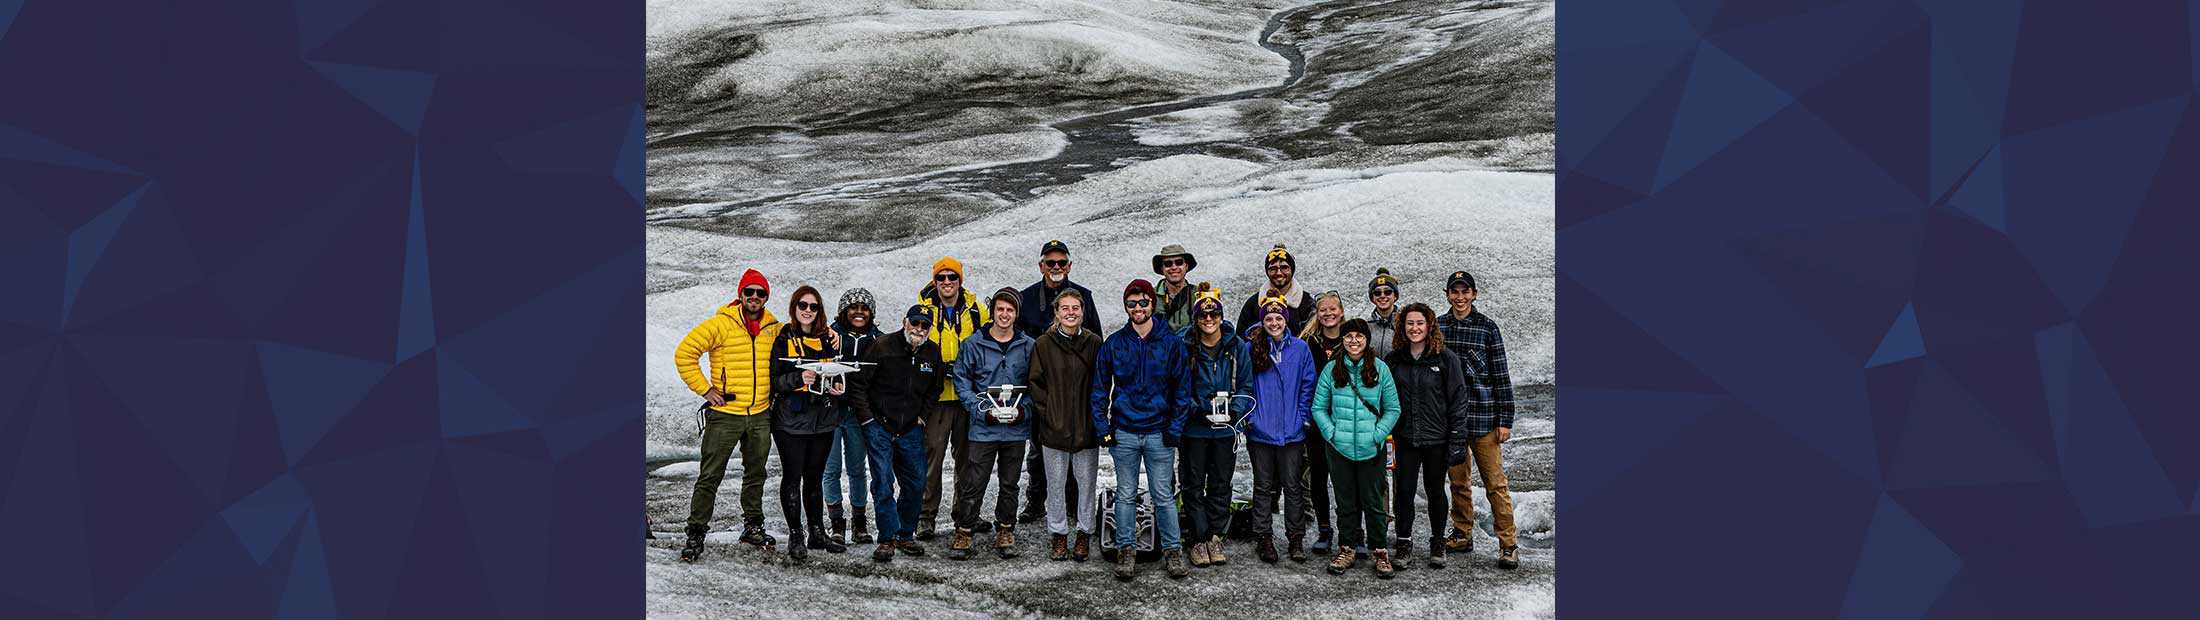 2019 CLASP Greenland Expedition group